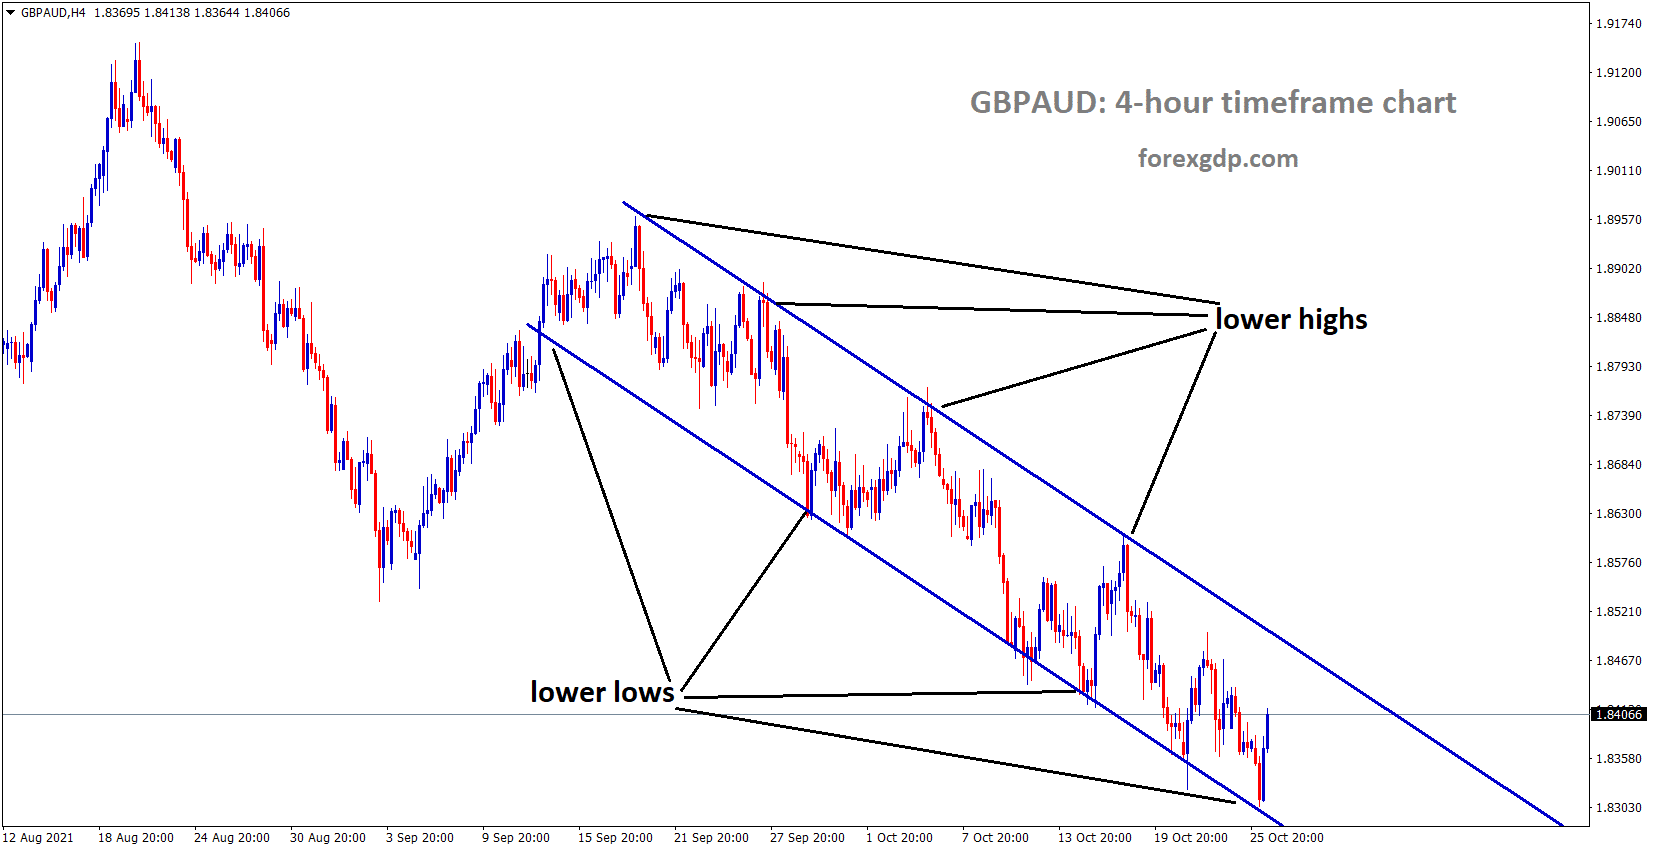 GBPAUD moving in a descending channel and price bouncing from lower low area